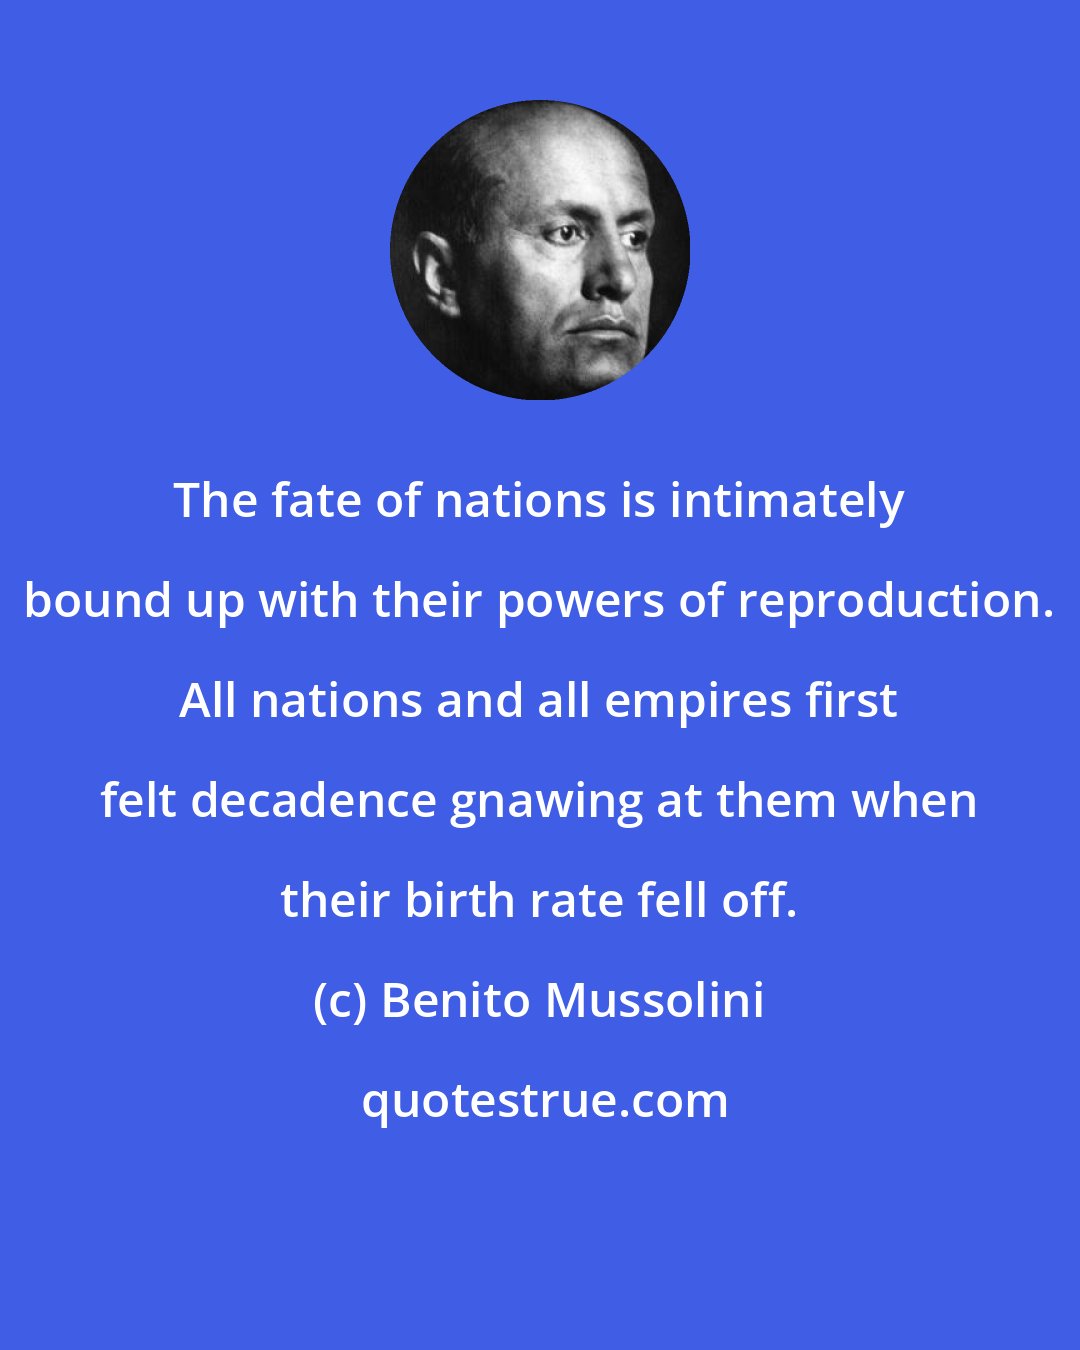 Benito Mussolini: The fate of nations is intimately bound up with their powers of reproduction. All nations and all empires first felt decadence gnawing at them when their birth rate fell off.